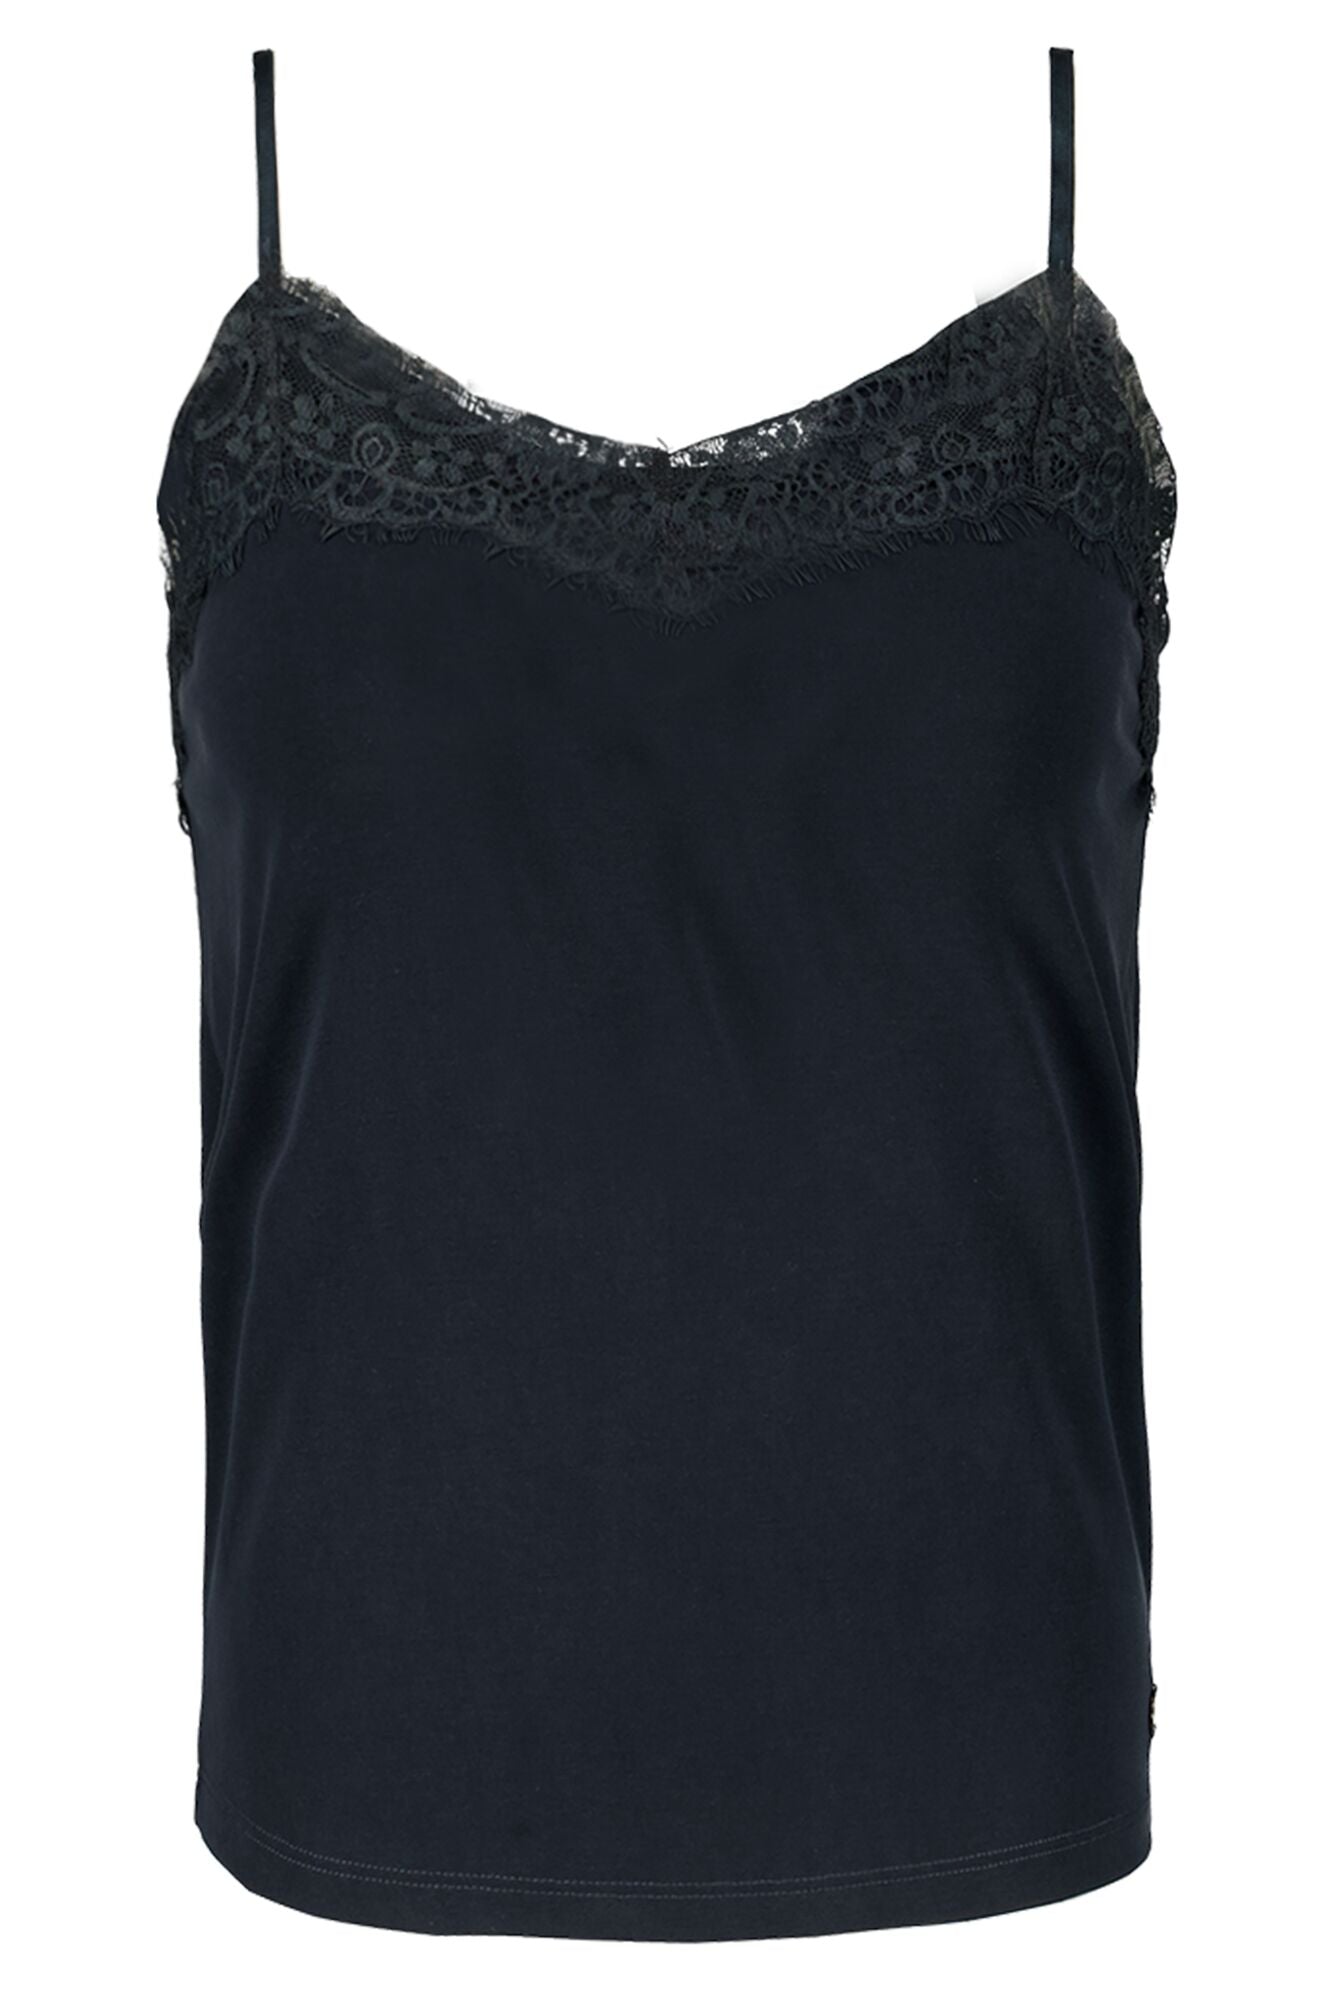 Black Top With Lace